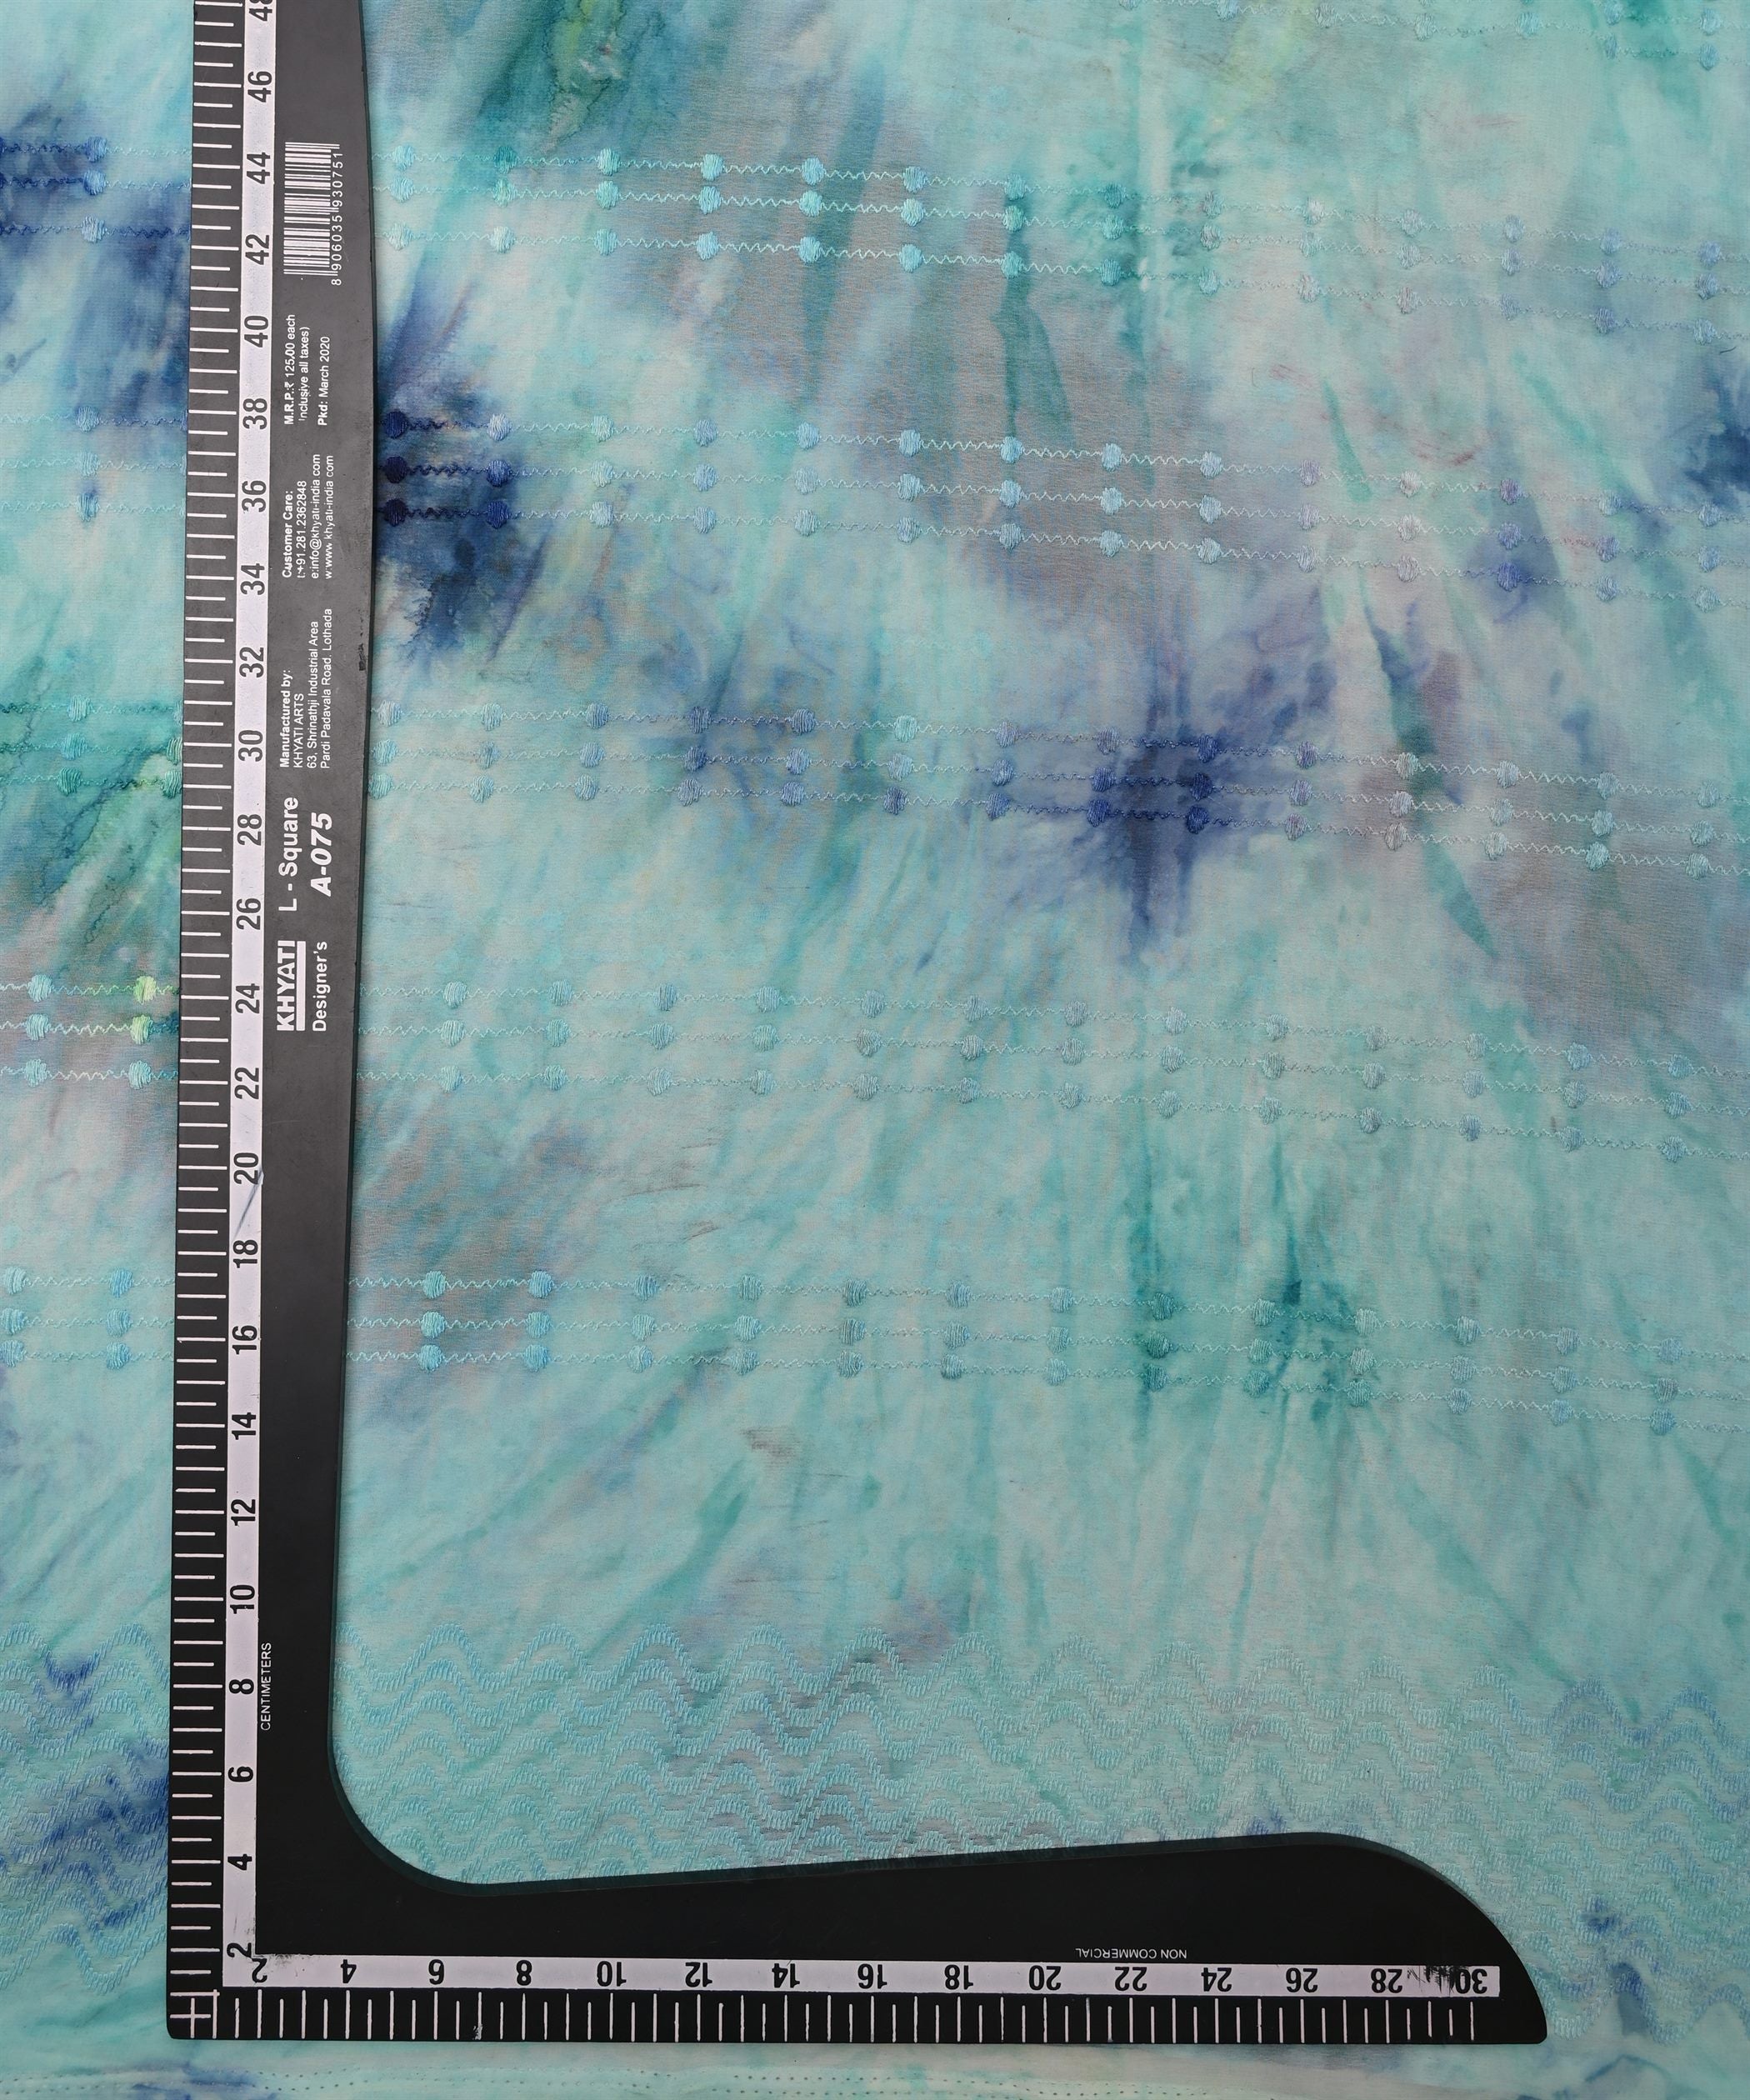 Blue Tie and Dye Weightless Fabric with Thread Lines